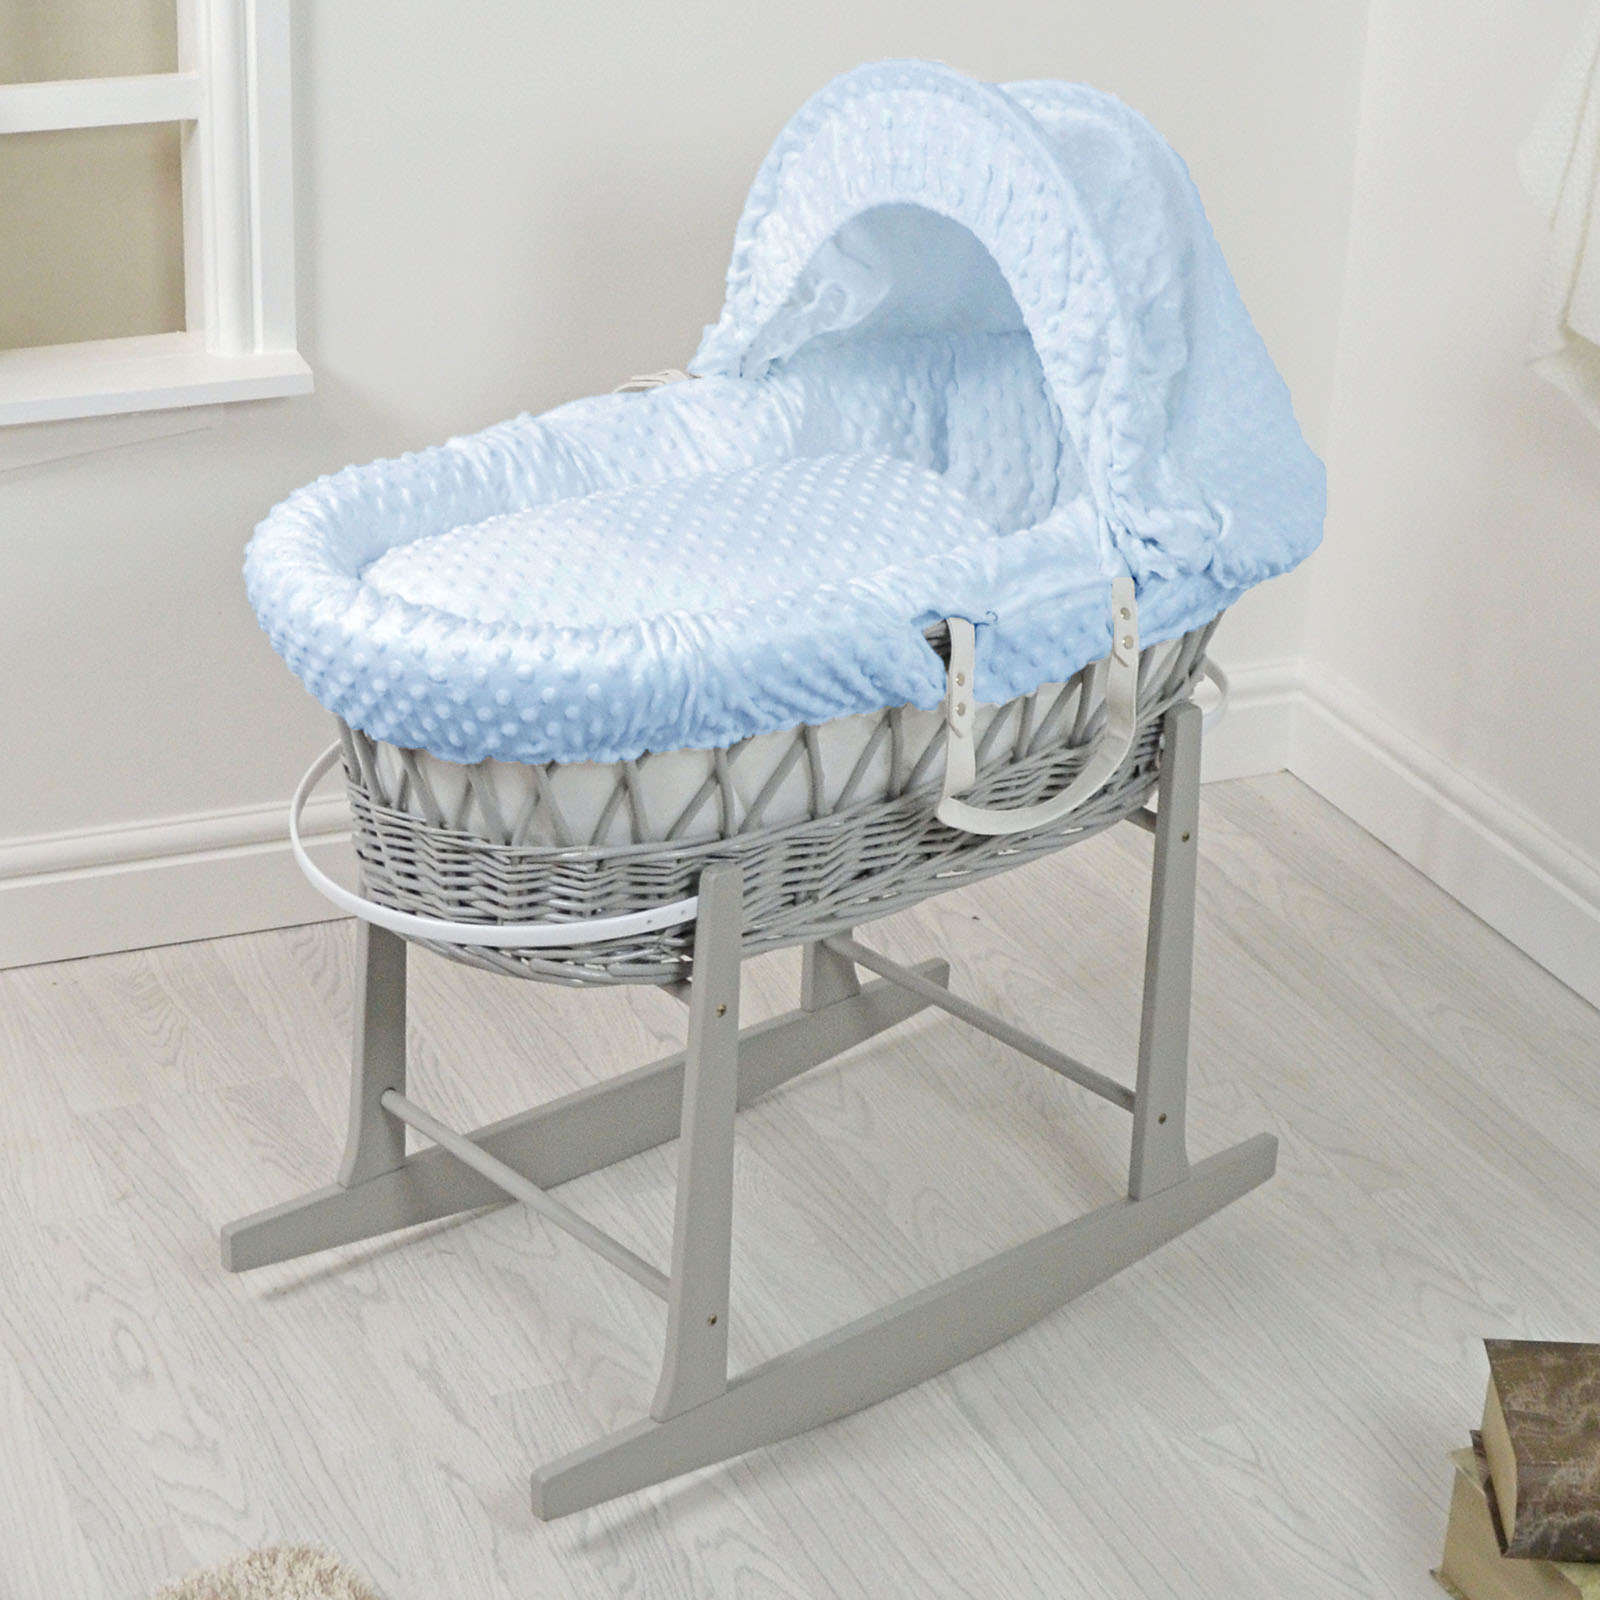 4Baby Padded Grey Wicker Moses Basket & Rocking Stand - Blue Dimple...